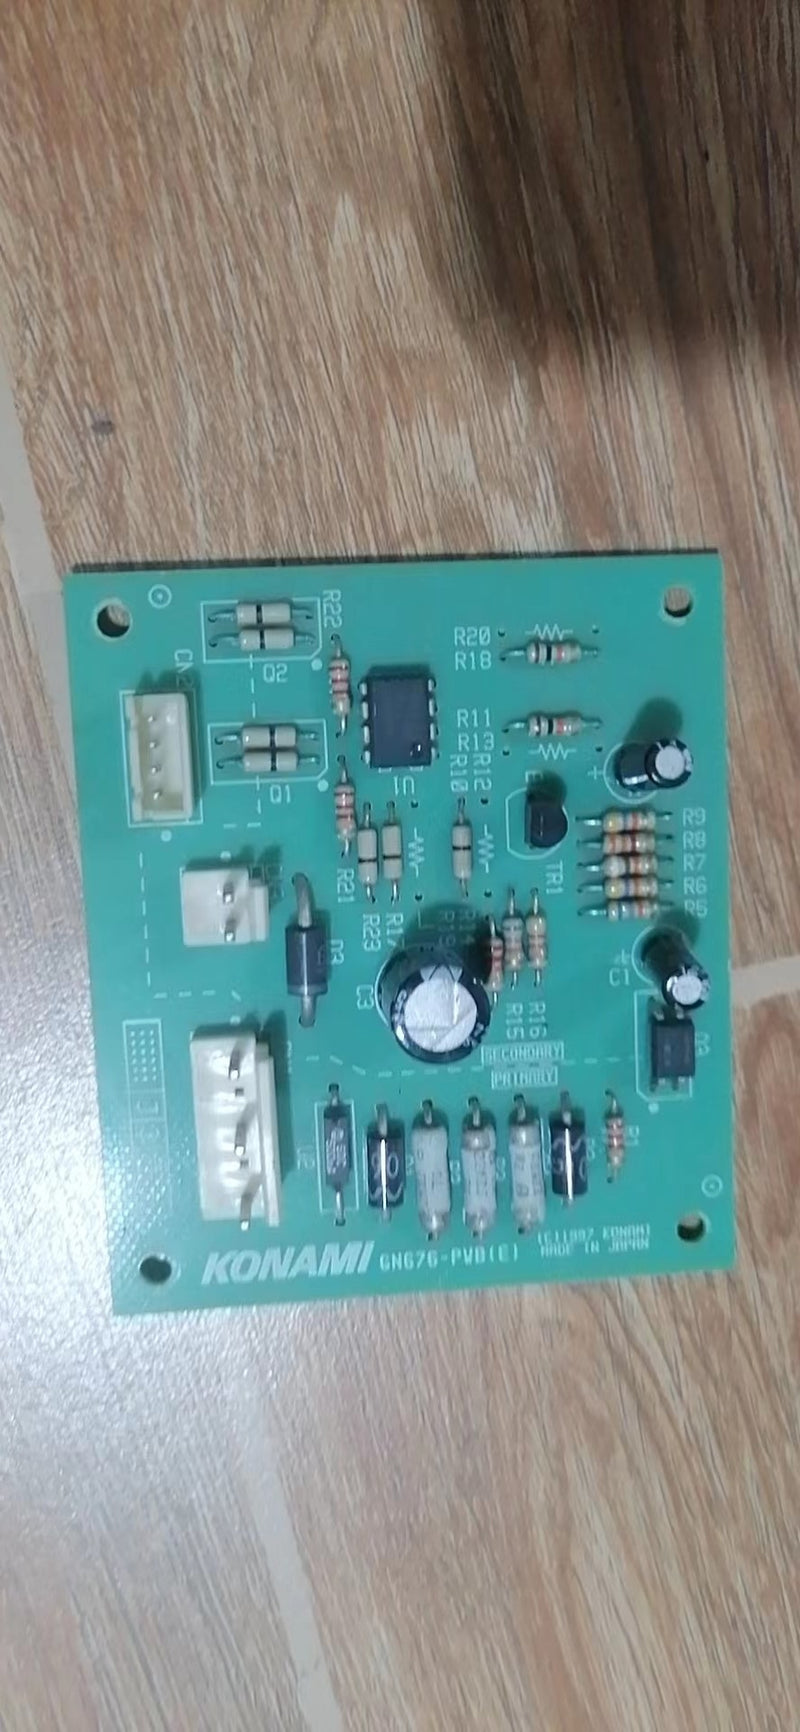 unknown and untested   konami board GN676 PWB(B).